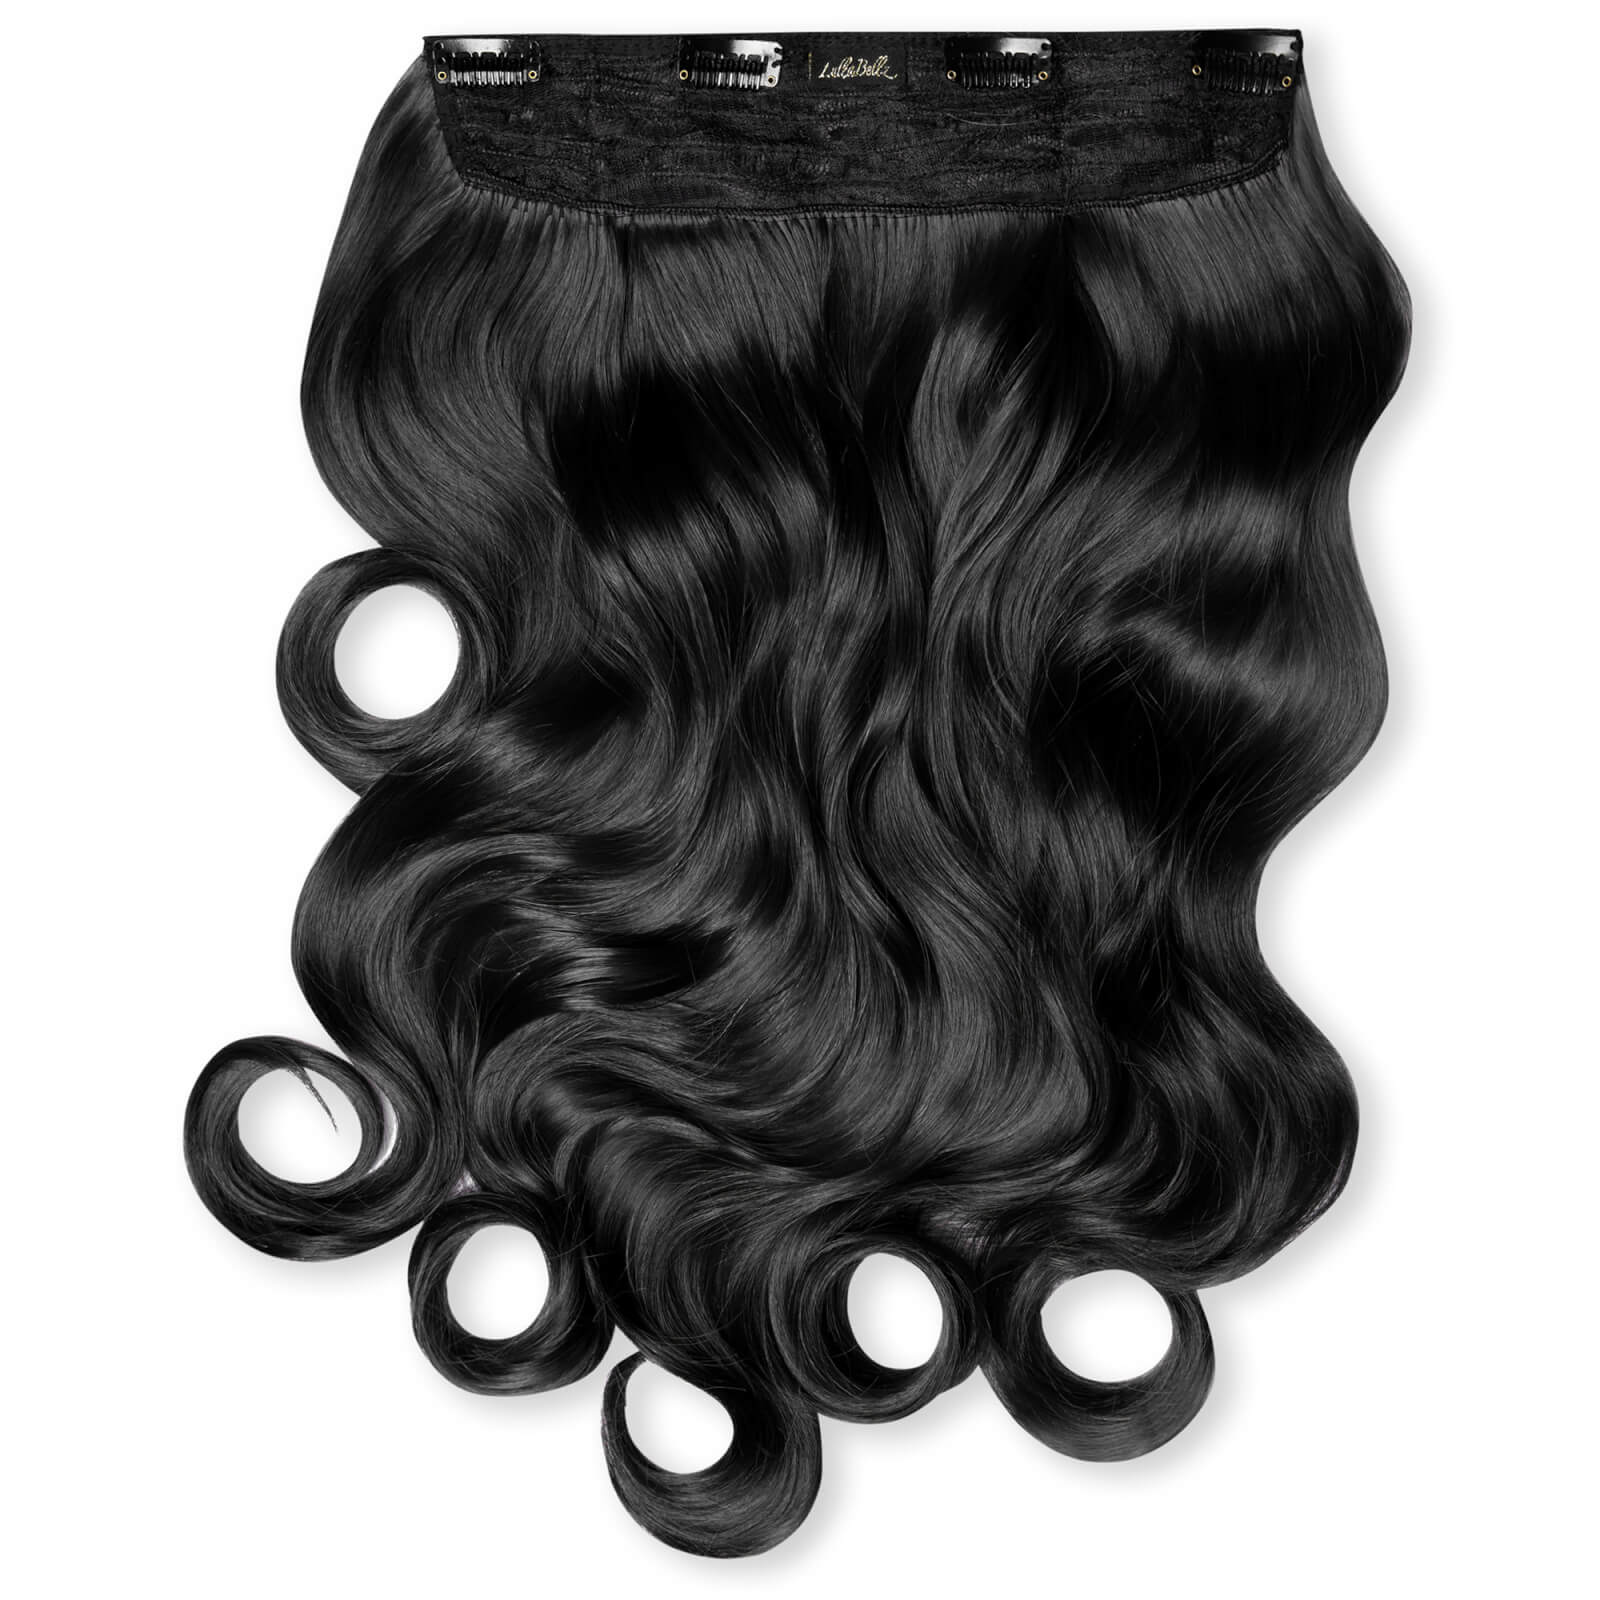 LullaBellz Thick 20 1-Piece Curly Clip in Hair Extensions (Various Colours) - Natural Black